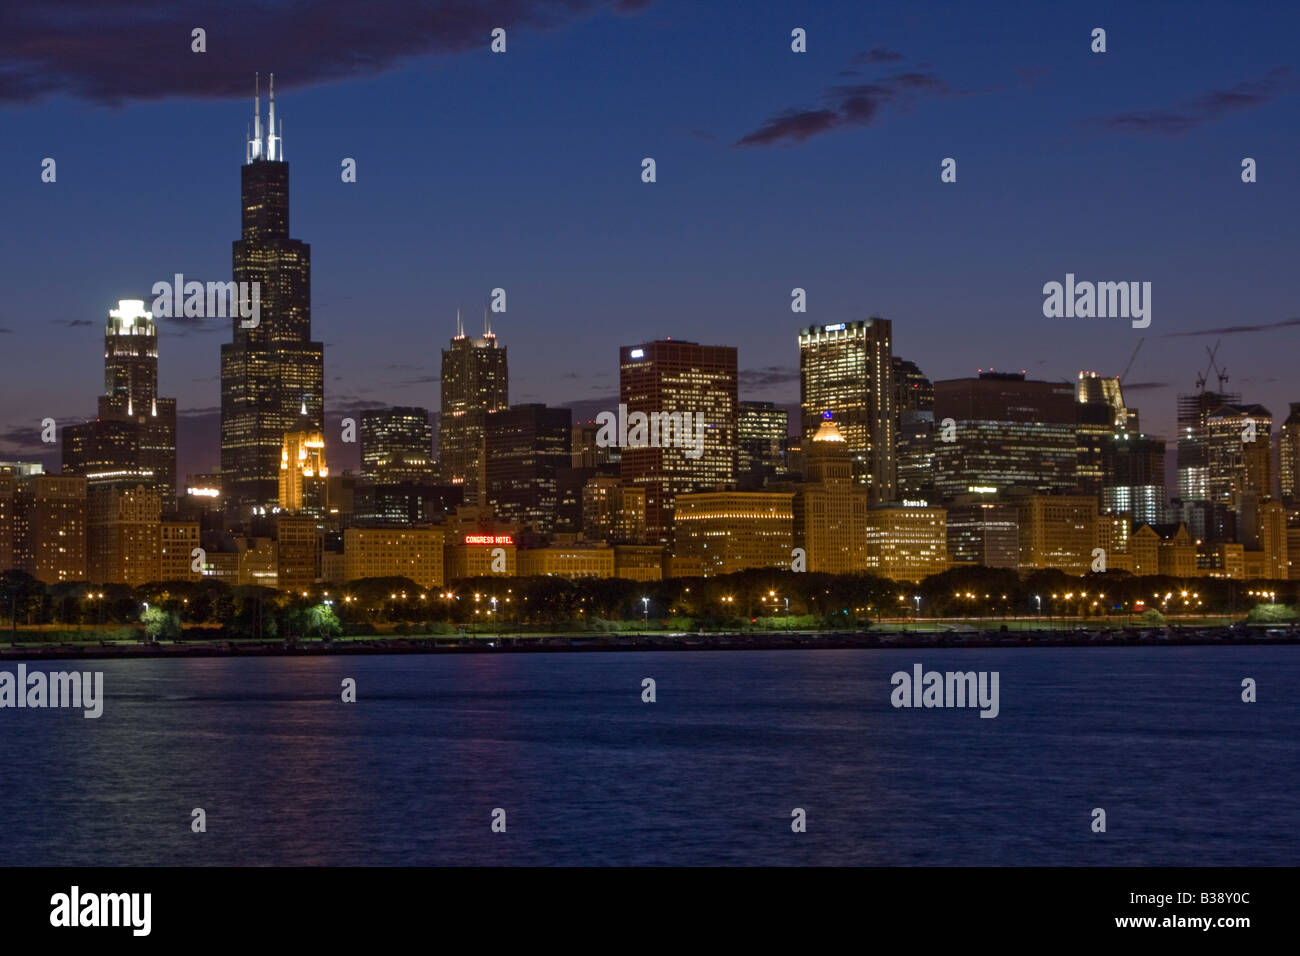 Chicago Illinois Skyline at Evening.   Sears Tower (Willis Tower) on Left, Lake Michigan in Foreground. Stock Photo